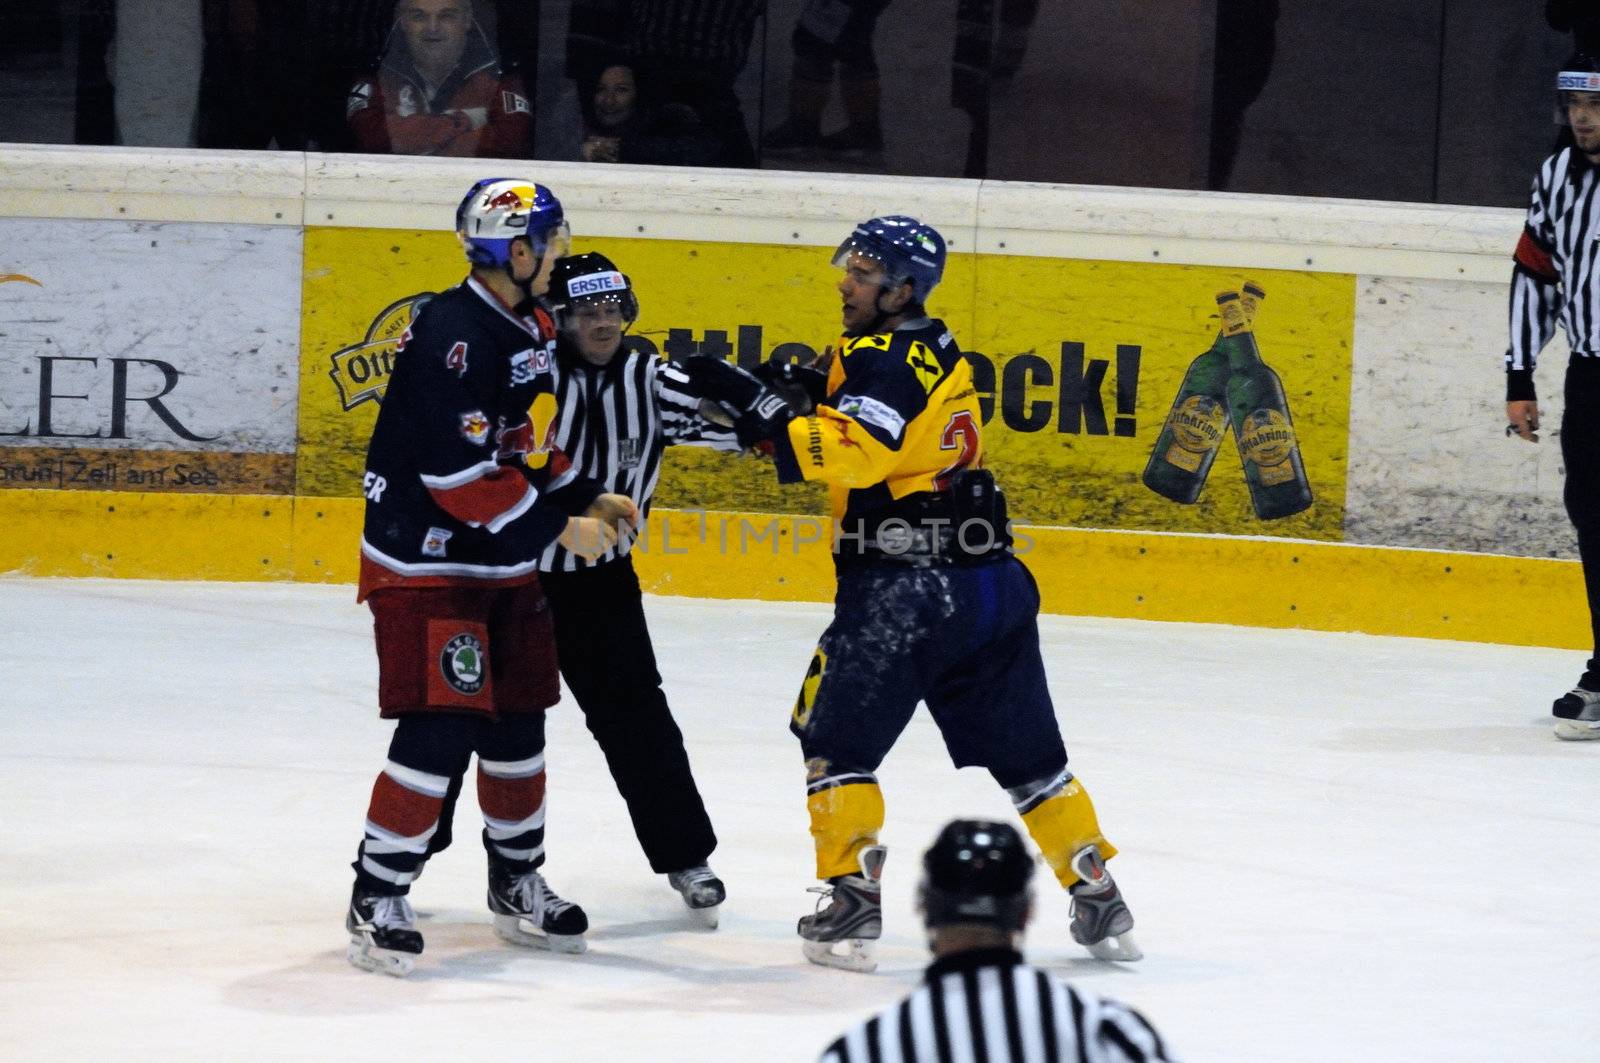 ZELL AM SEE, AUSTRIA - DECEMBER 7: Austrian National League. Referees stopping fight between Schernthaner and Mitterdorfer. Game EK Zell am See vs. Red Bulls Salzburg (Result 4-6) on December 7, 2010, at hockey rink of Zell am See